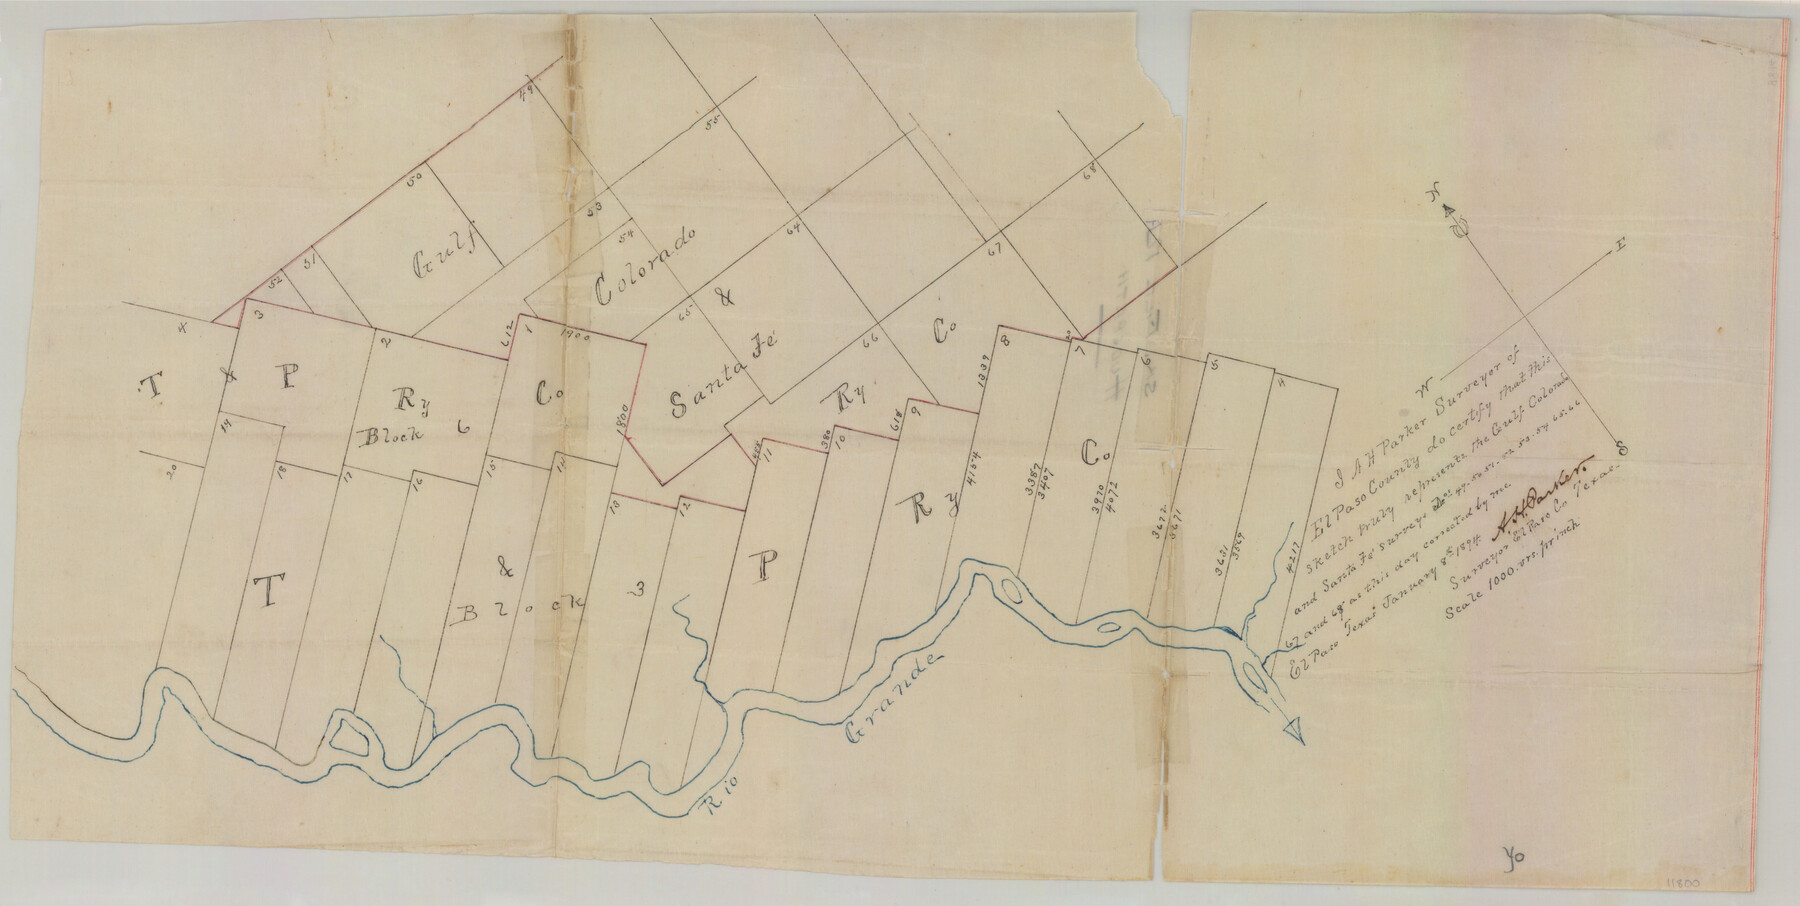 11800, Hudspeth county Sketch File 12a, General Map Collection